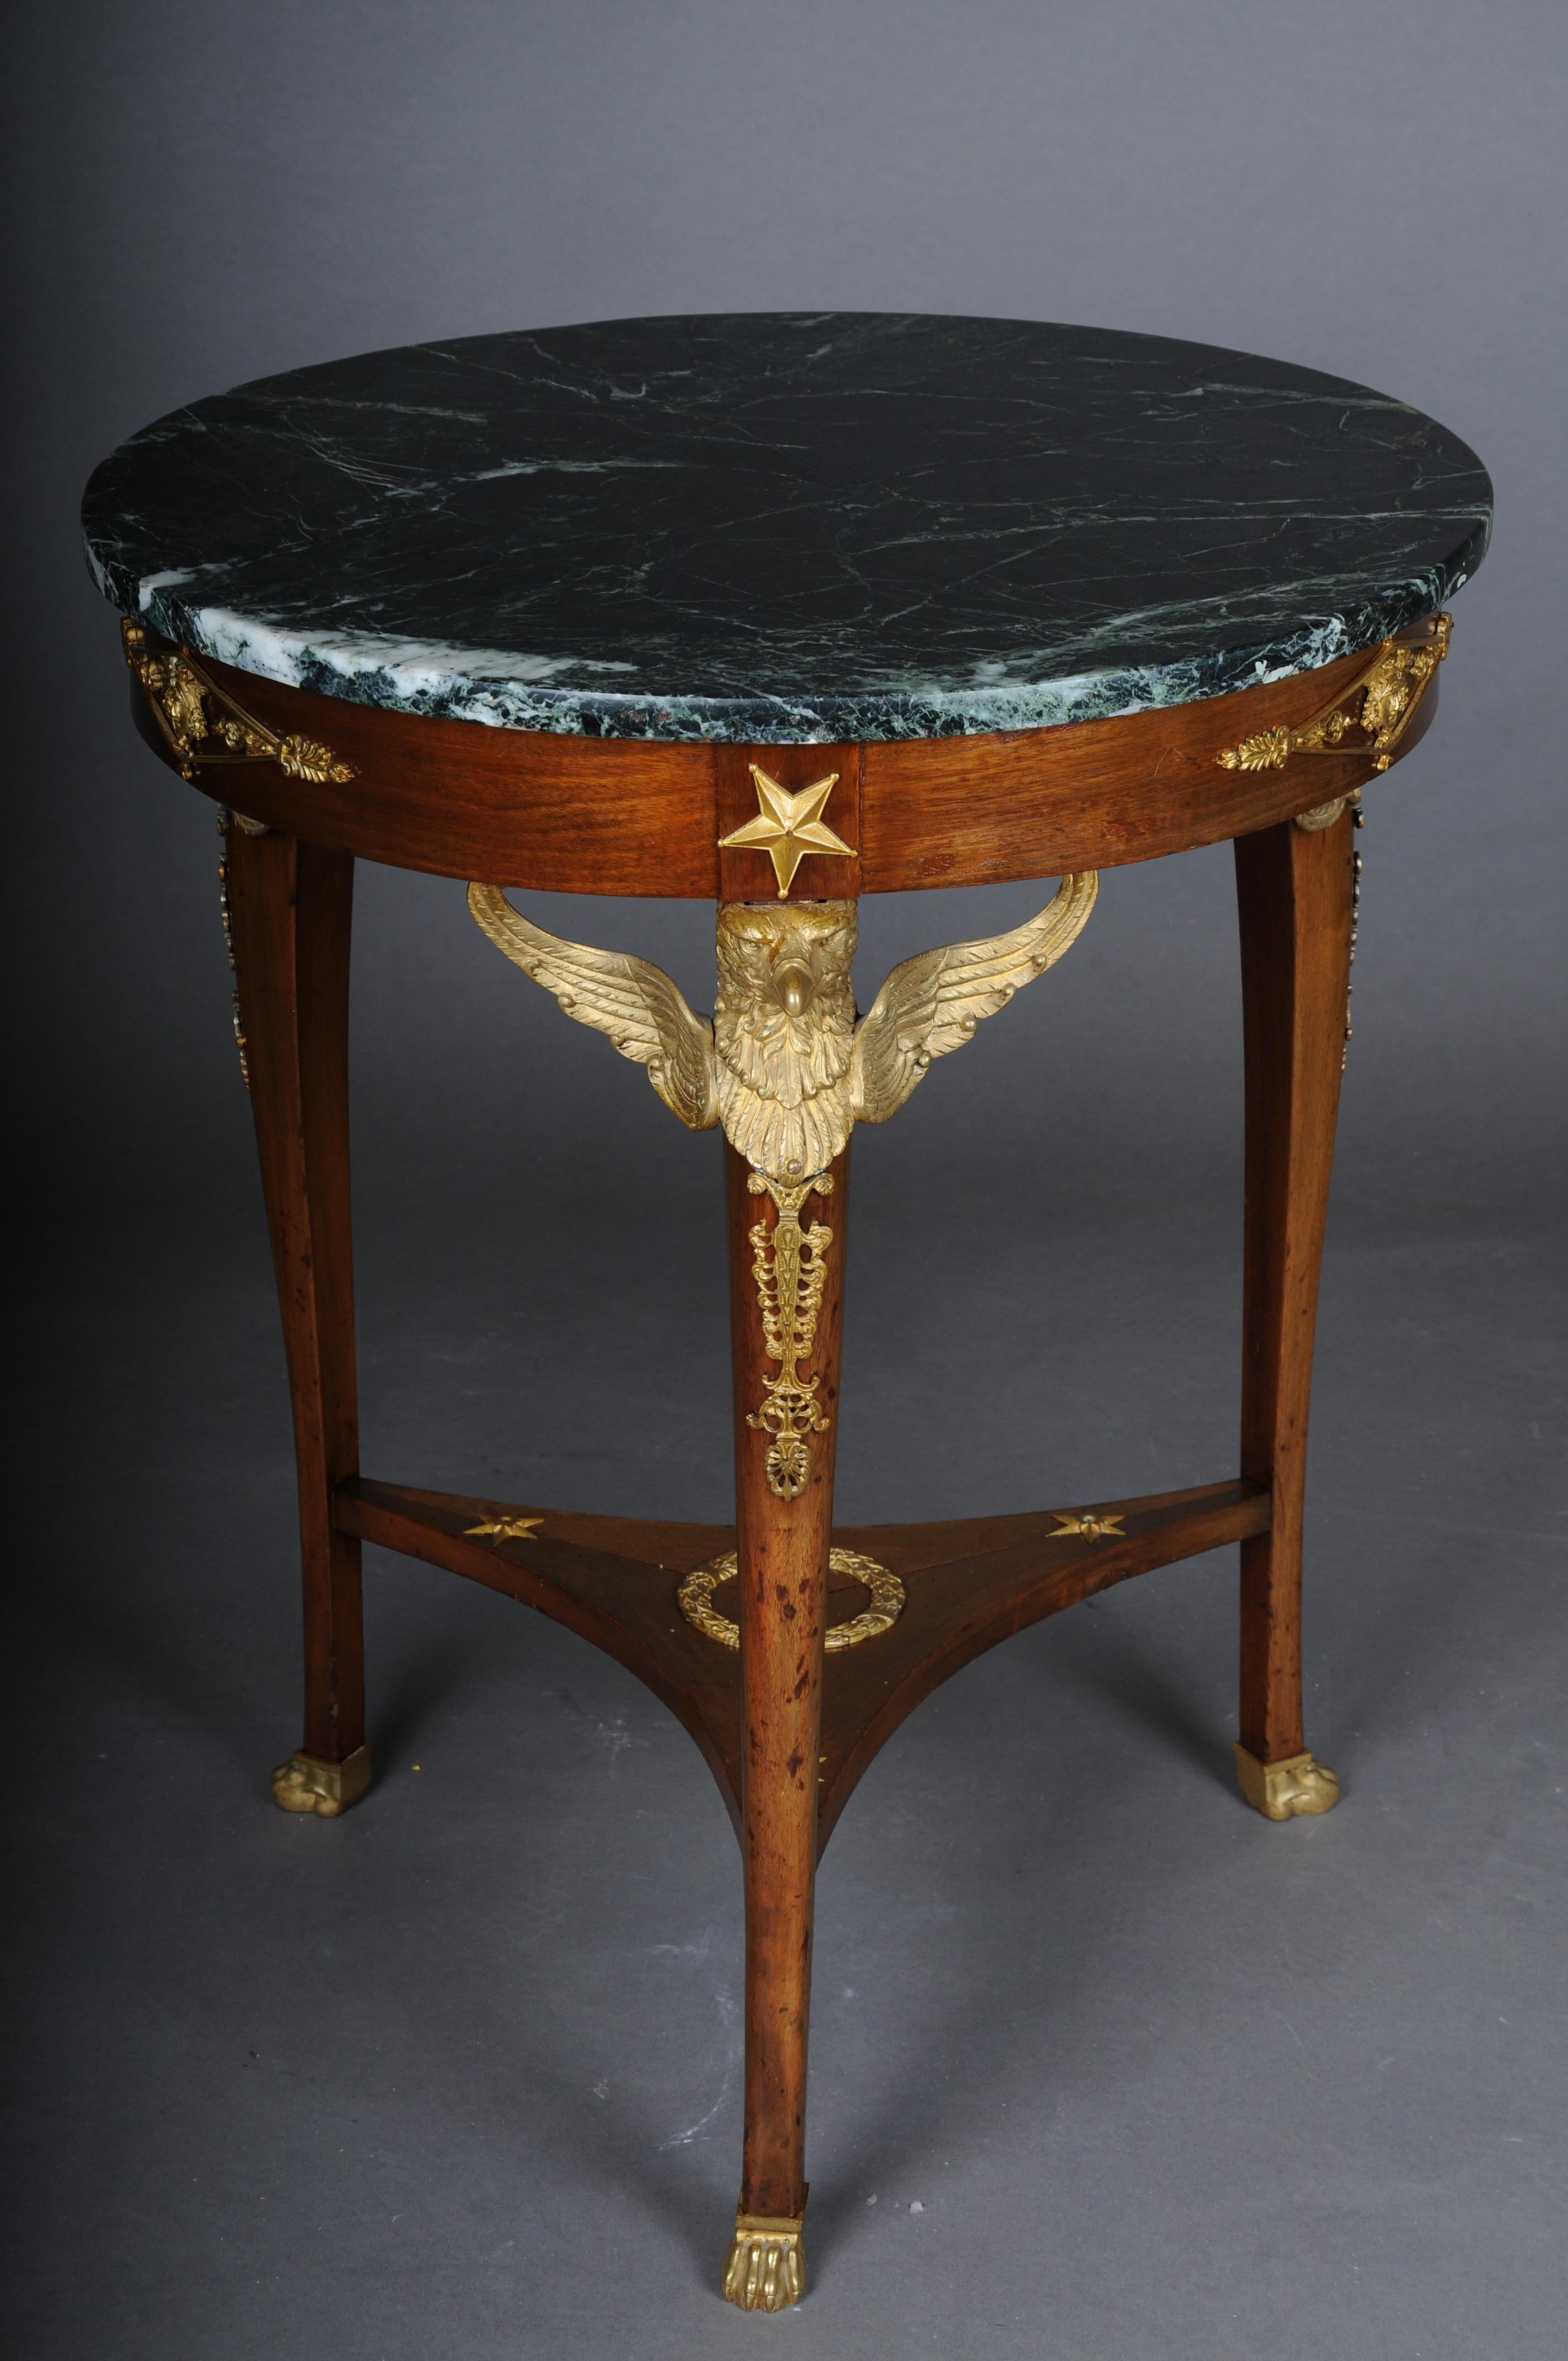 19th Century Empire side table, gilt bronze, eagle, mahogany, Paris

Impressive Empire side table, round top with mottled marble top. Exceptionally finely crafted table with chased and gilded bronze fittings. Body articulated on three legs, each